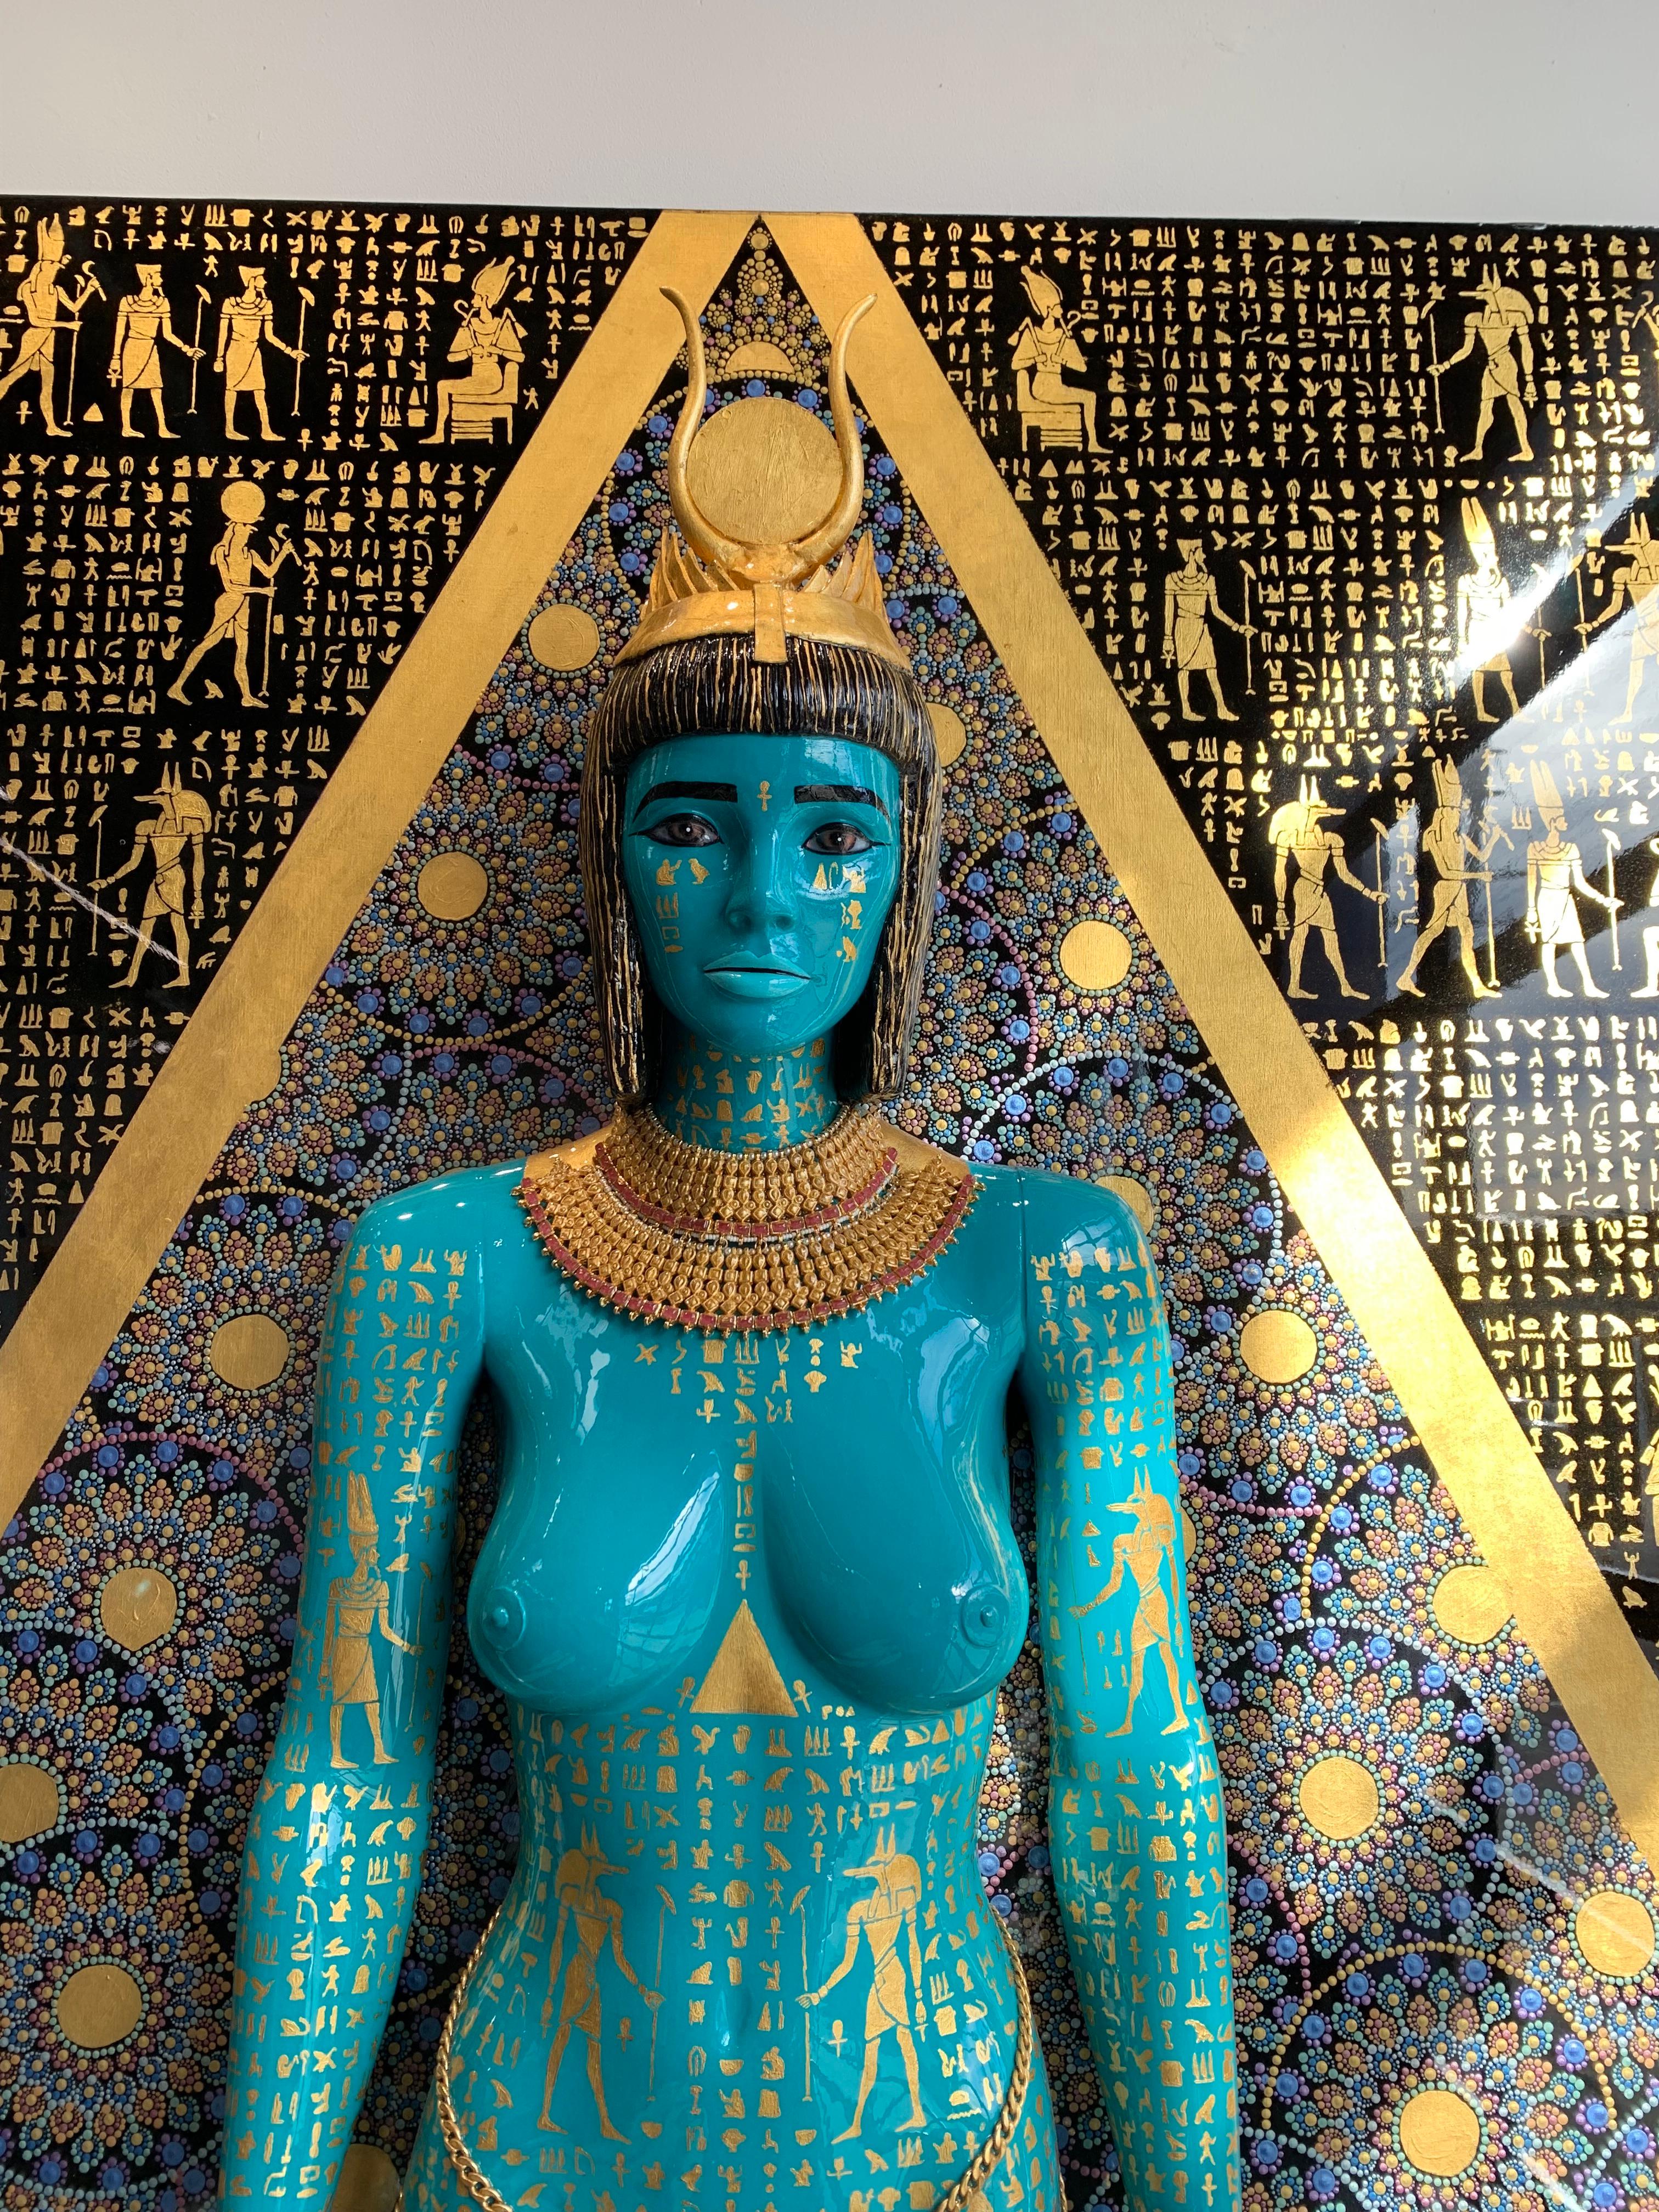 queen of the nile